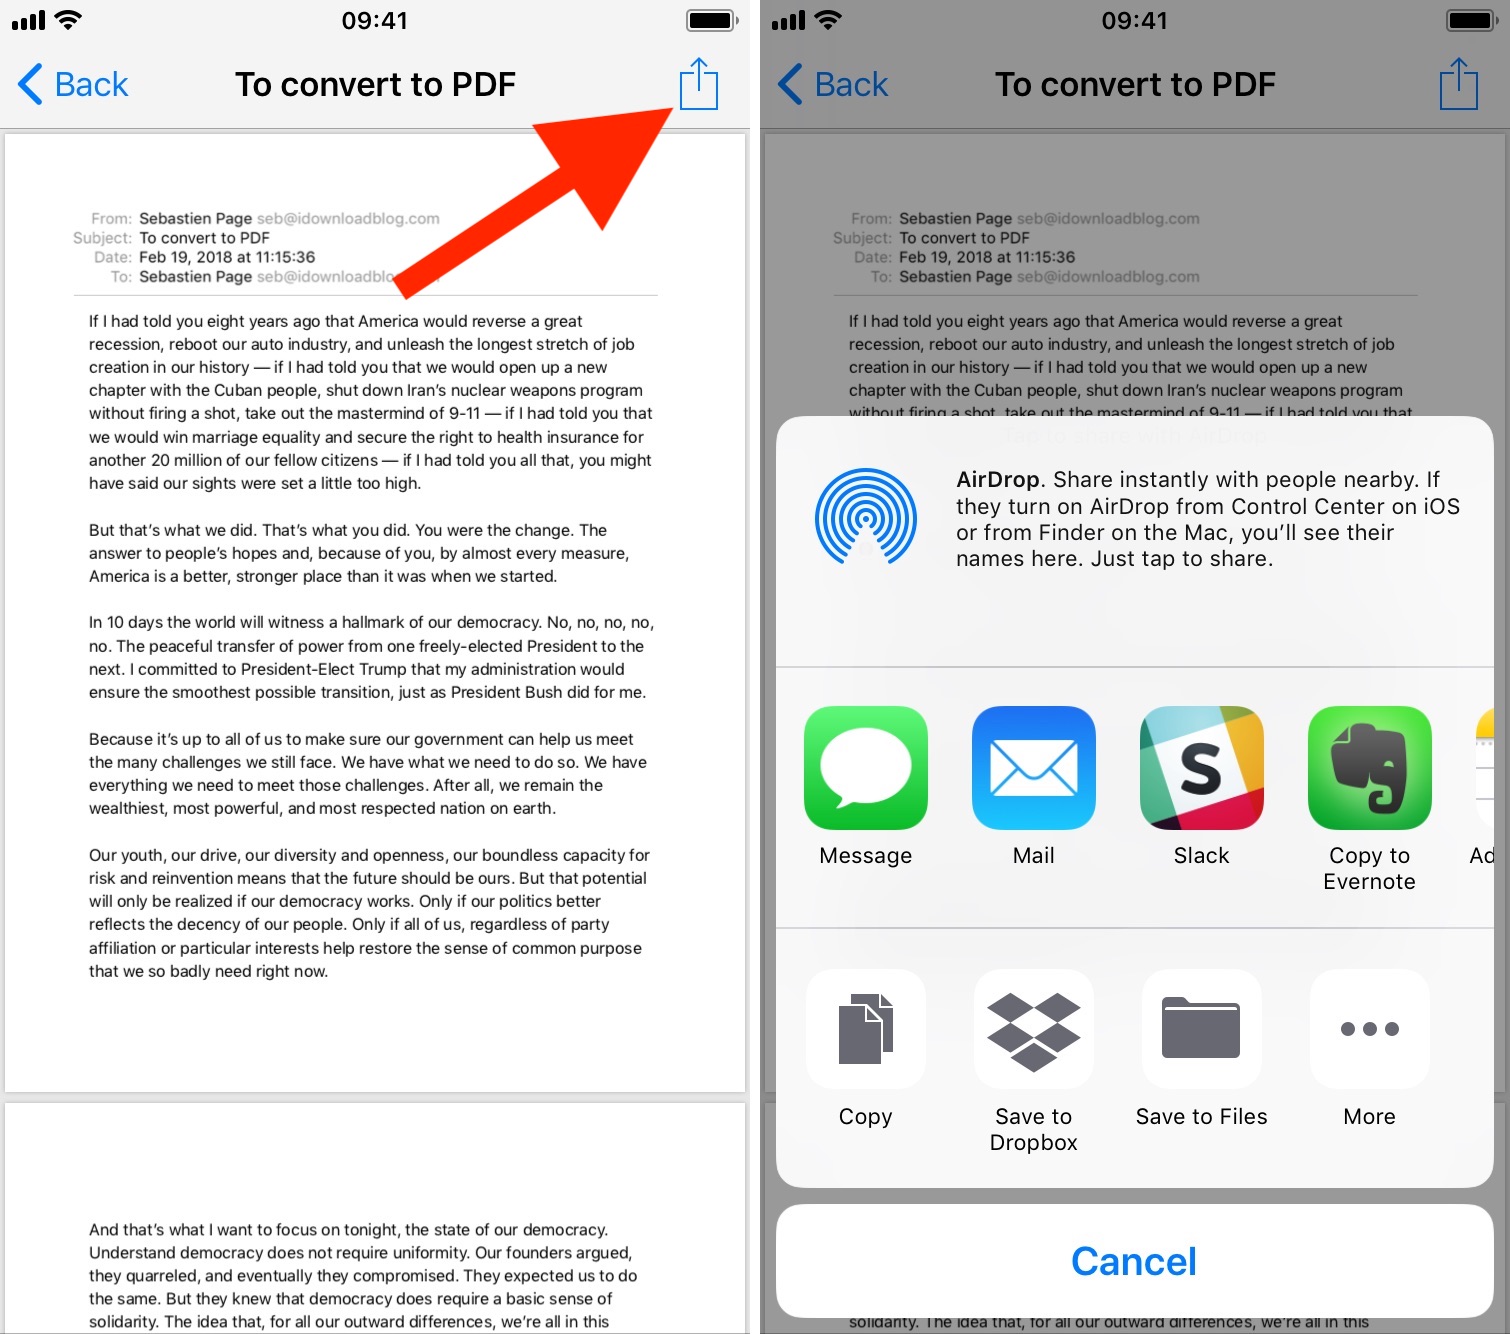 how to save documents from email on ipad